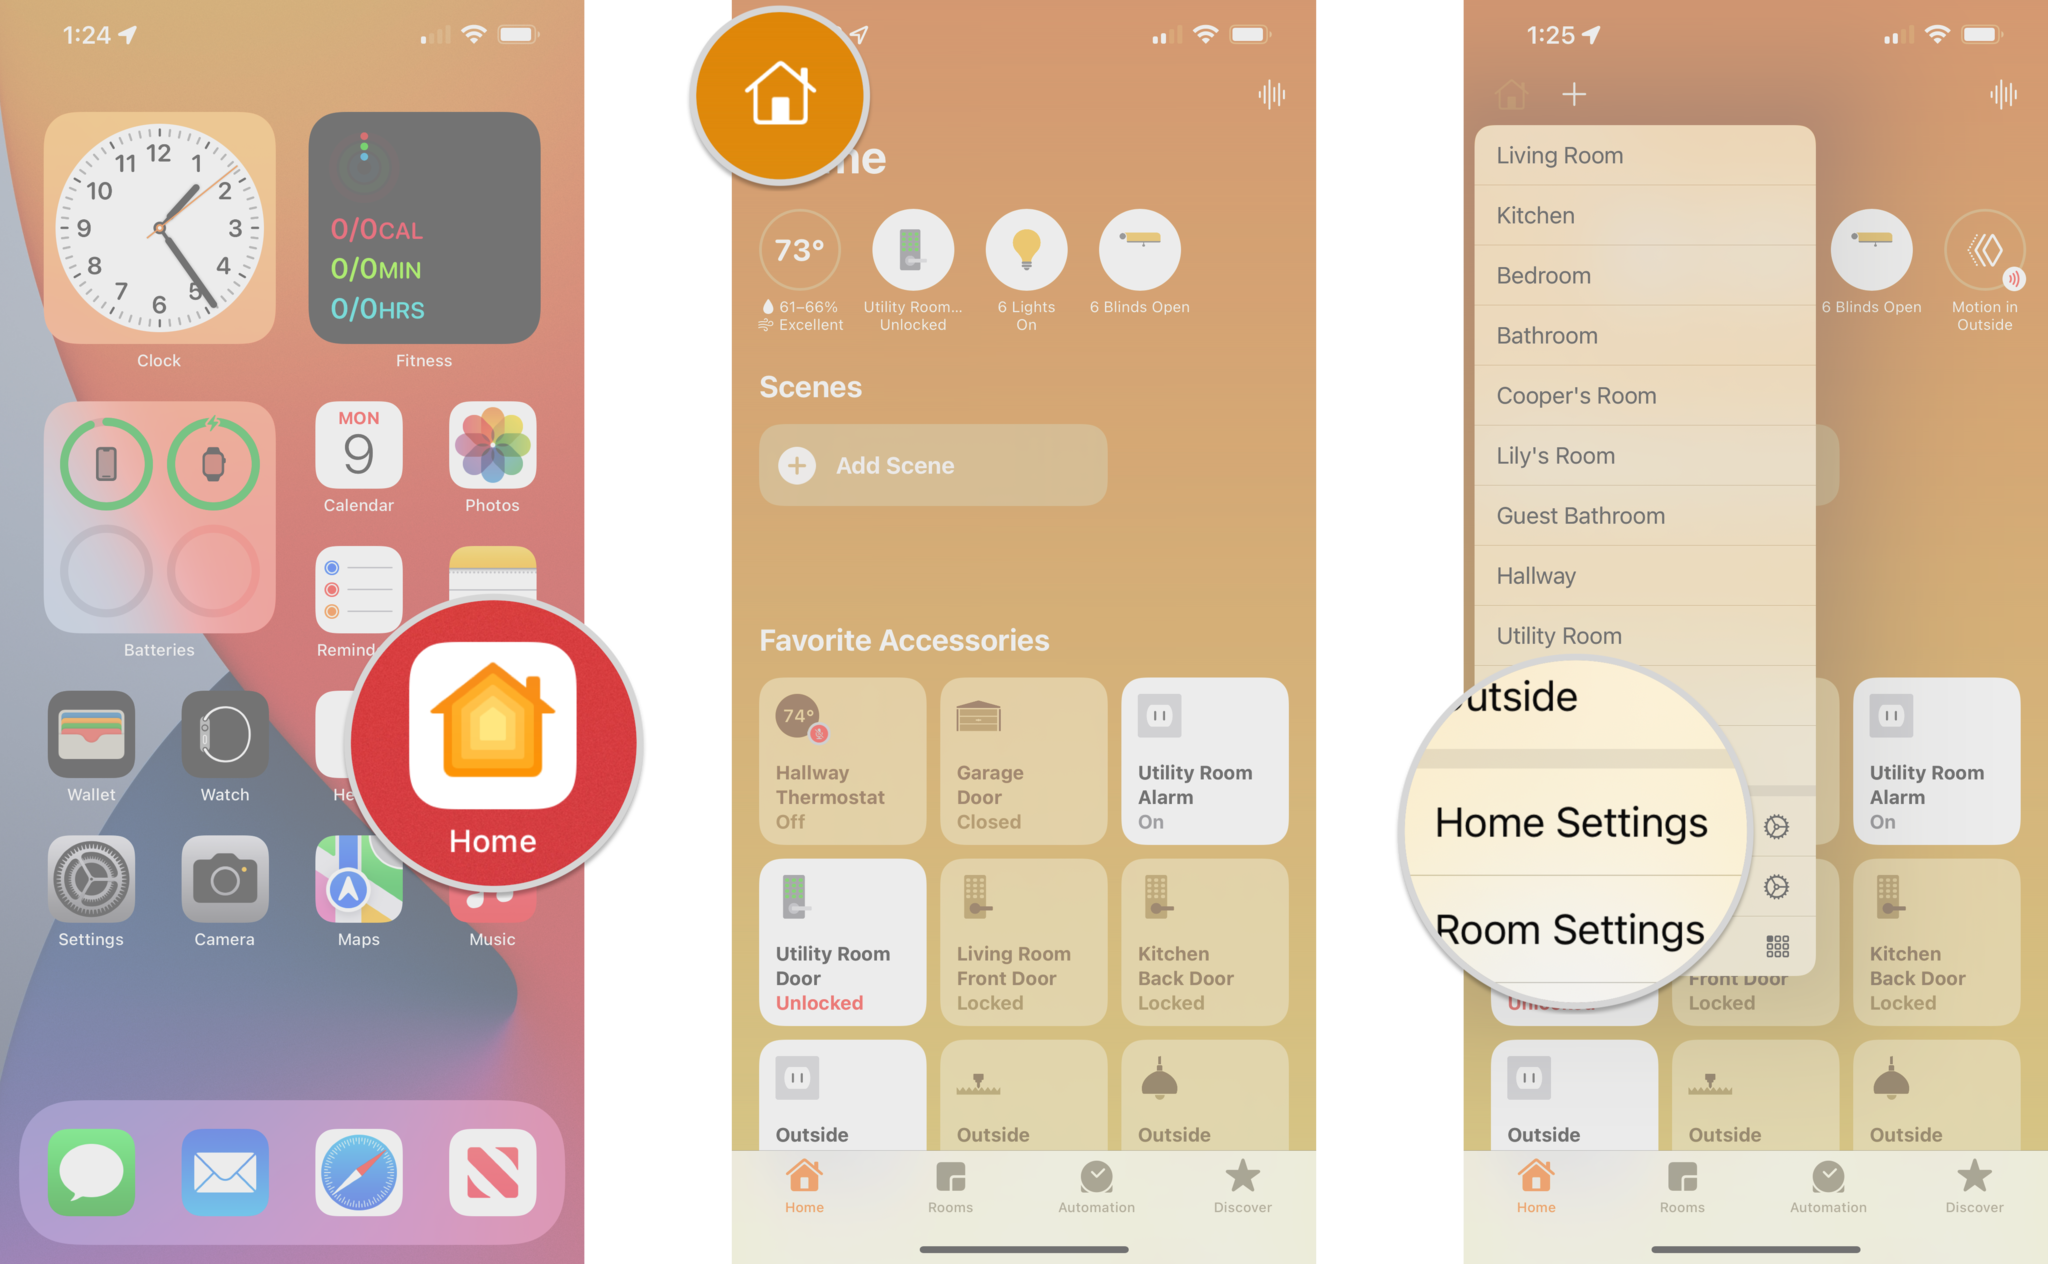 How to enable HomeKit sensor notifications on an iPhone by showing steps: Launch the Home app, Tap the House icon, Tap Home Settings